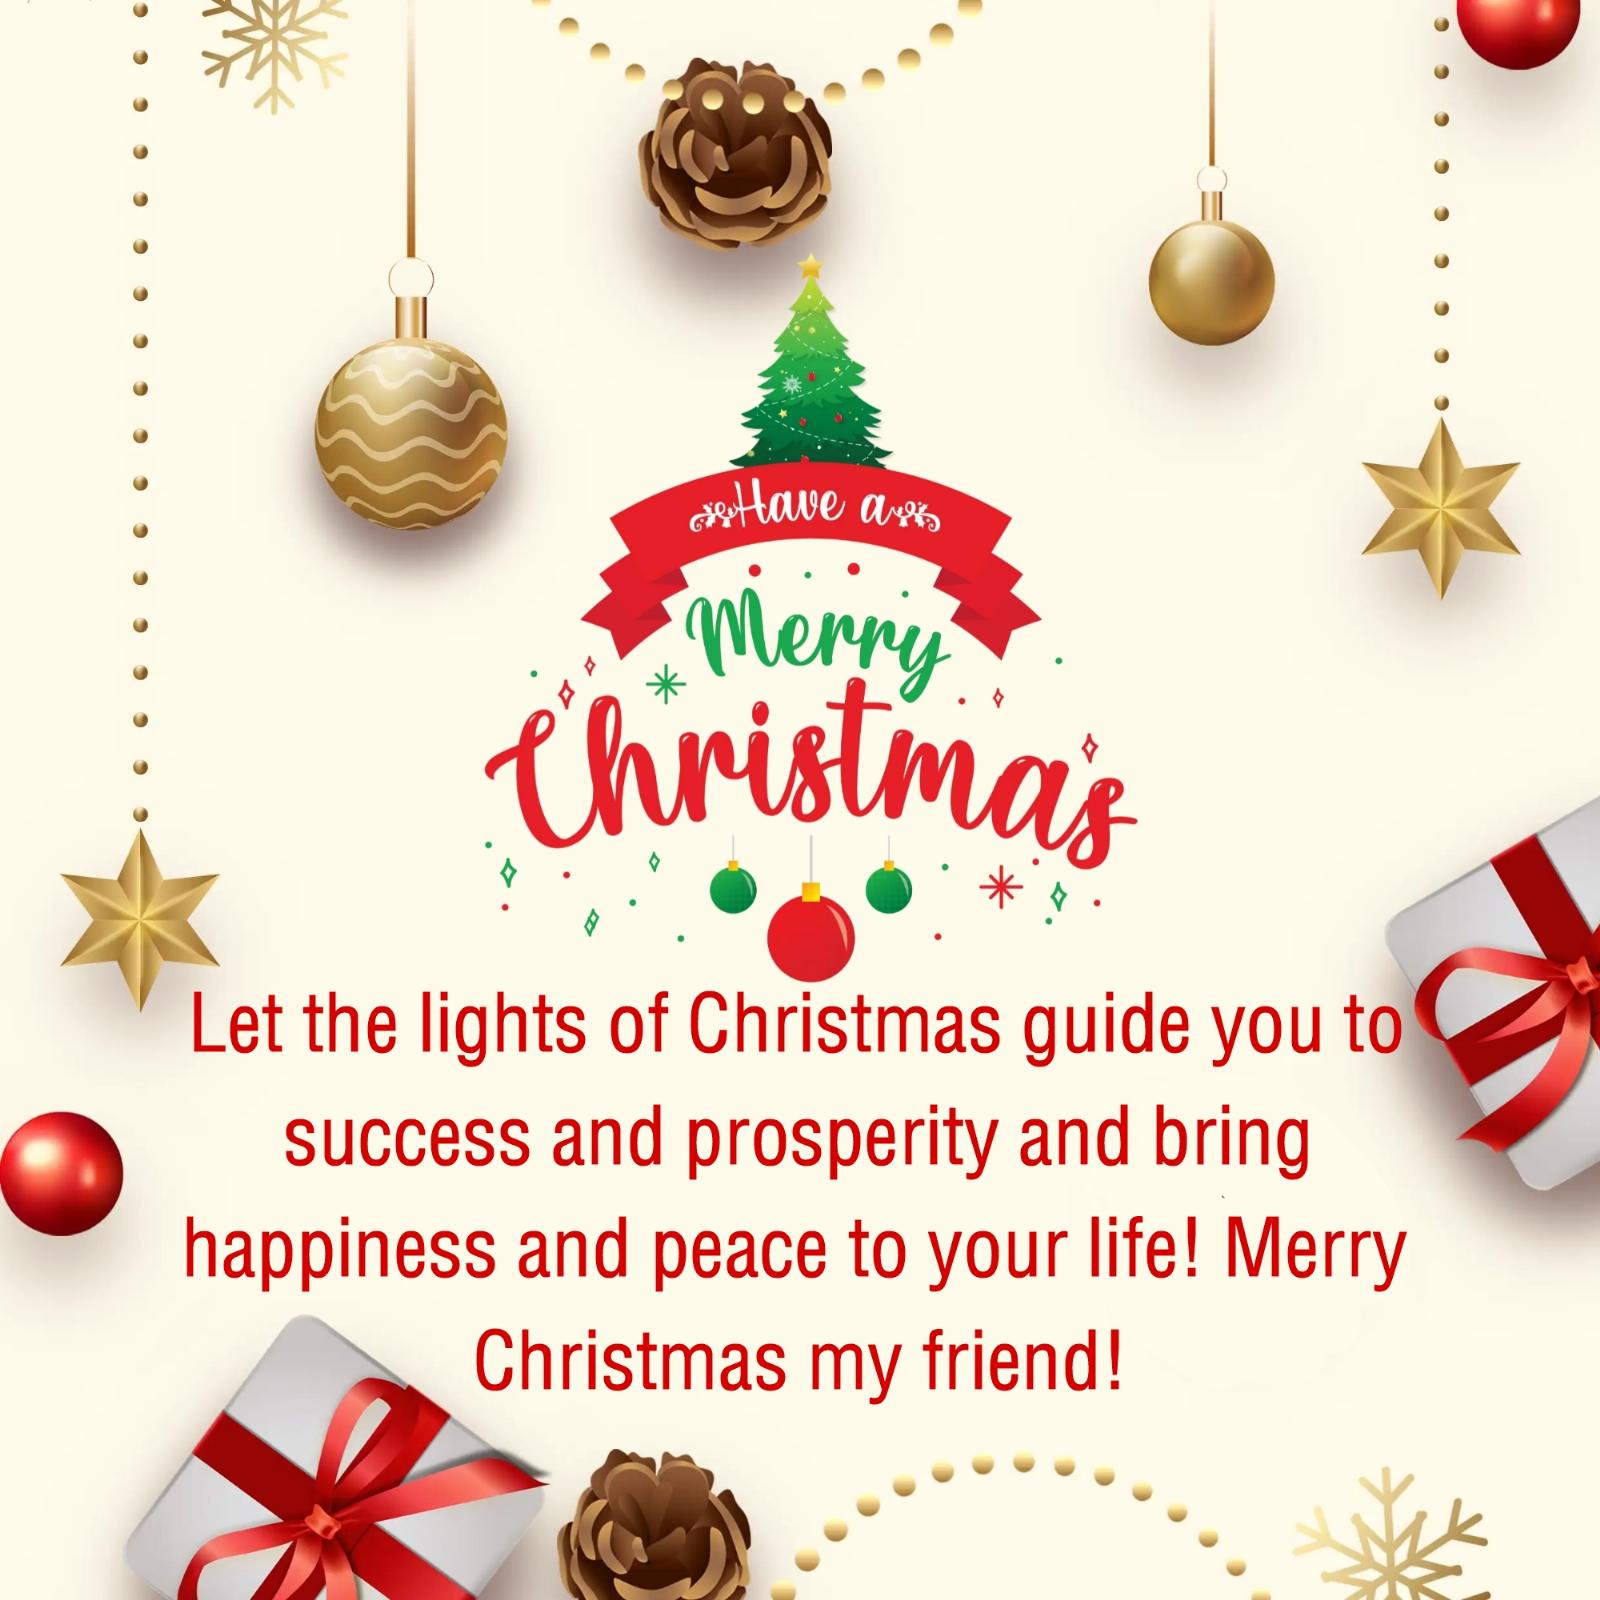 Let the lights of Christmas guide you to success